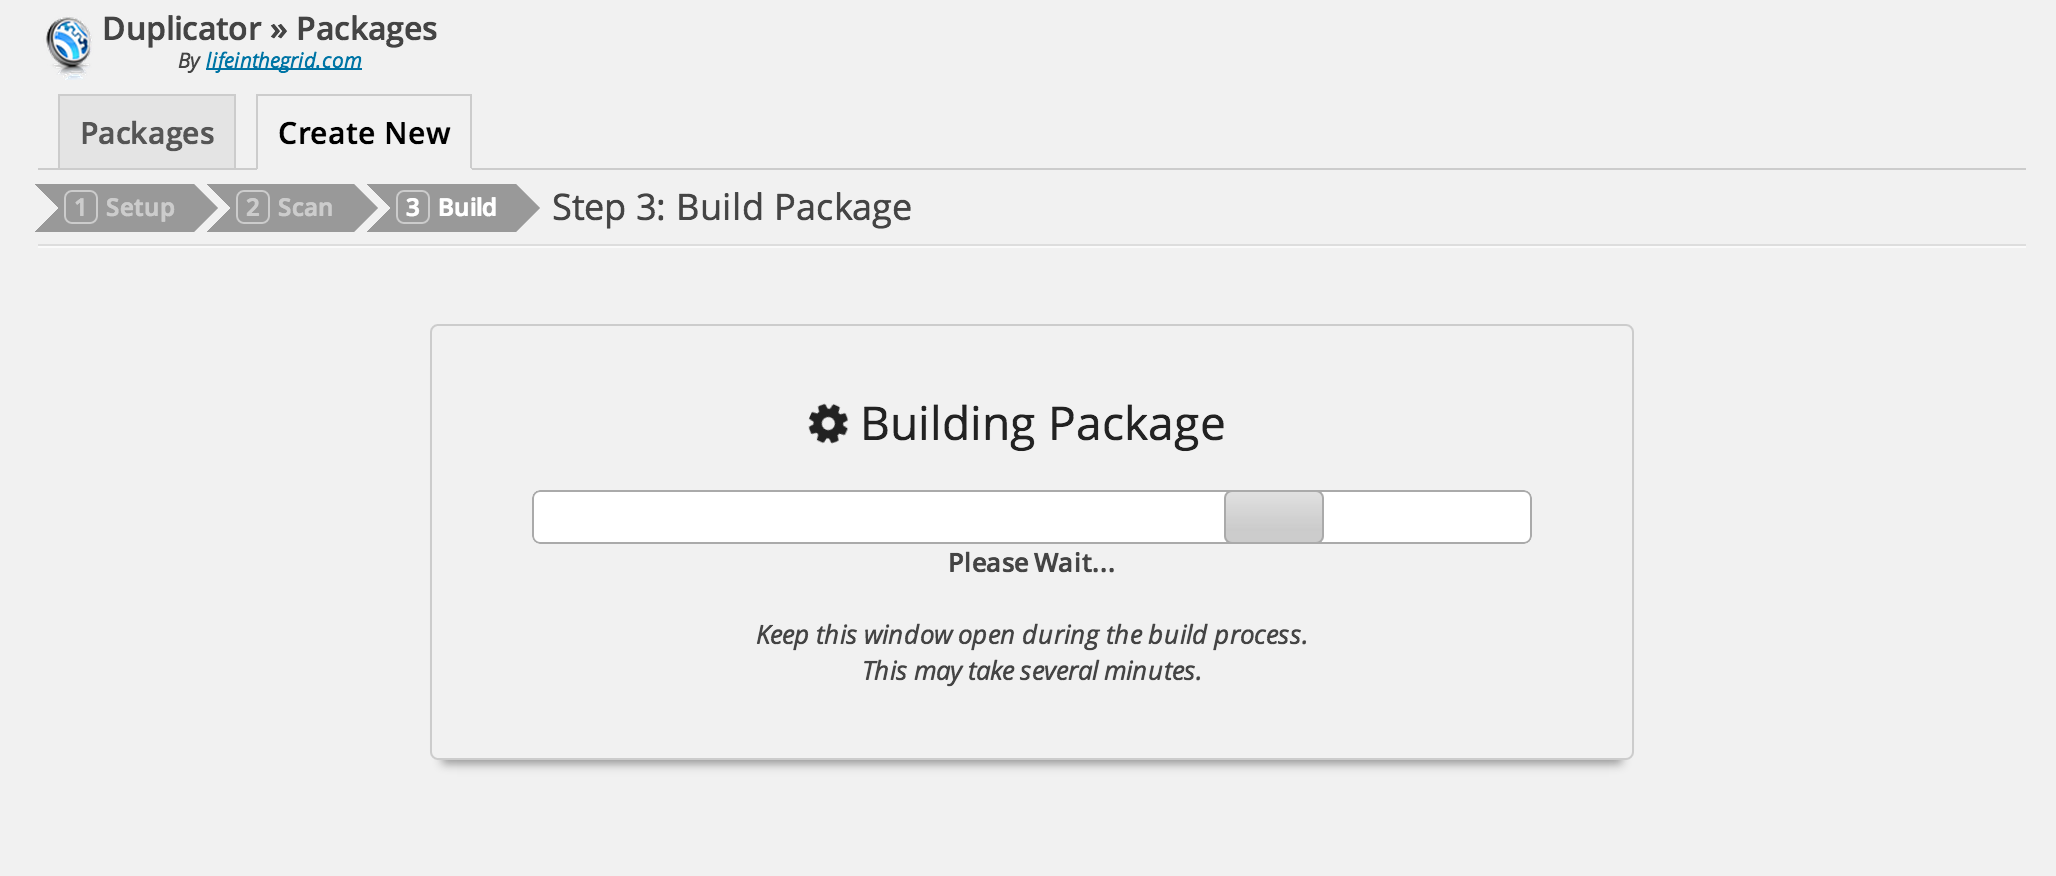 Wait for Duplicator to build the Package